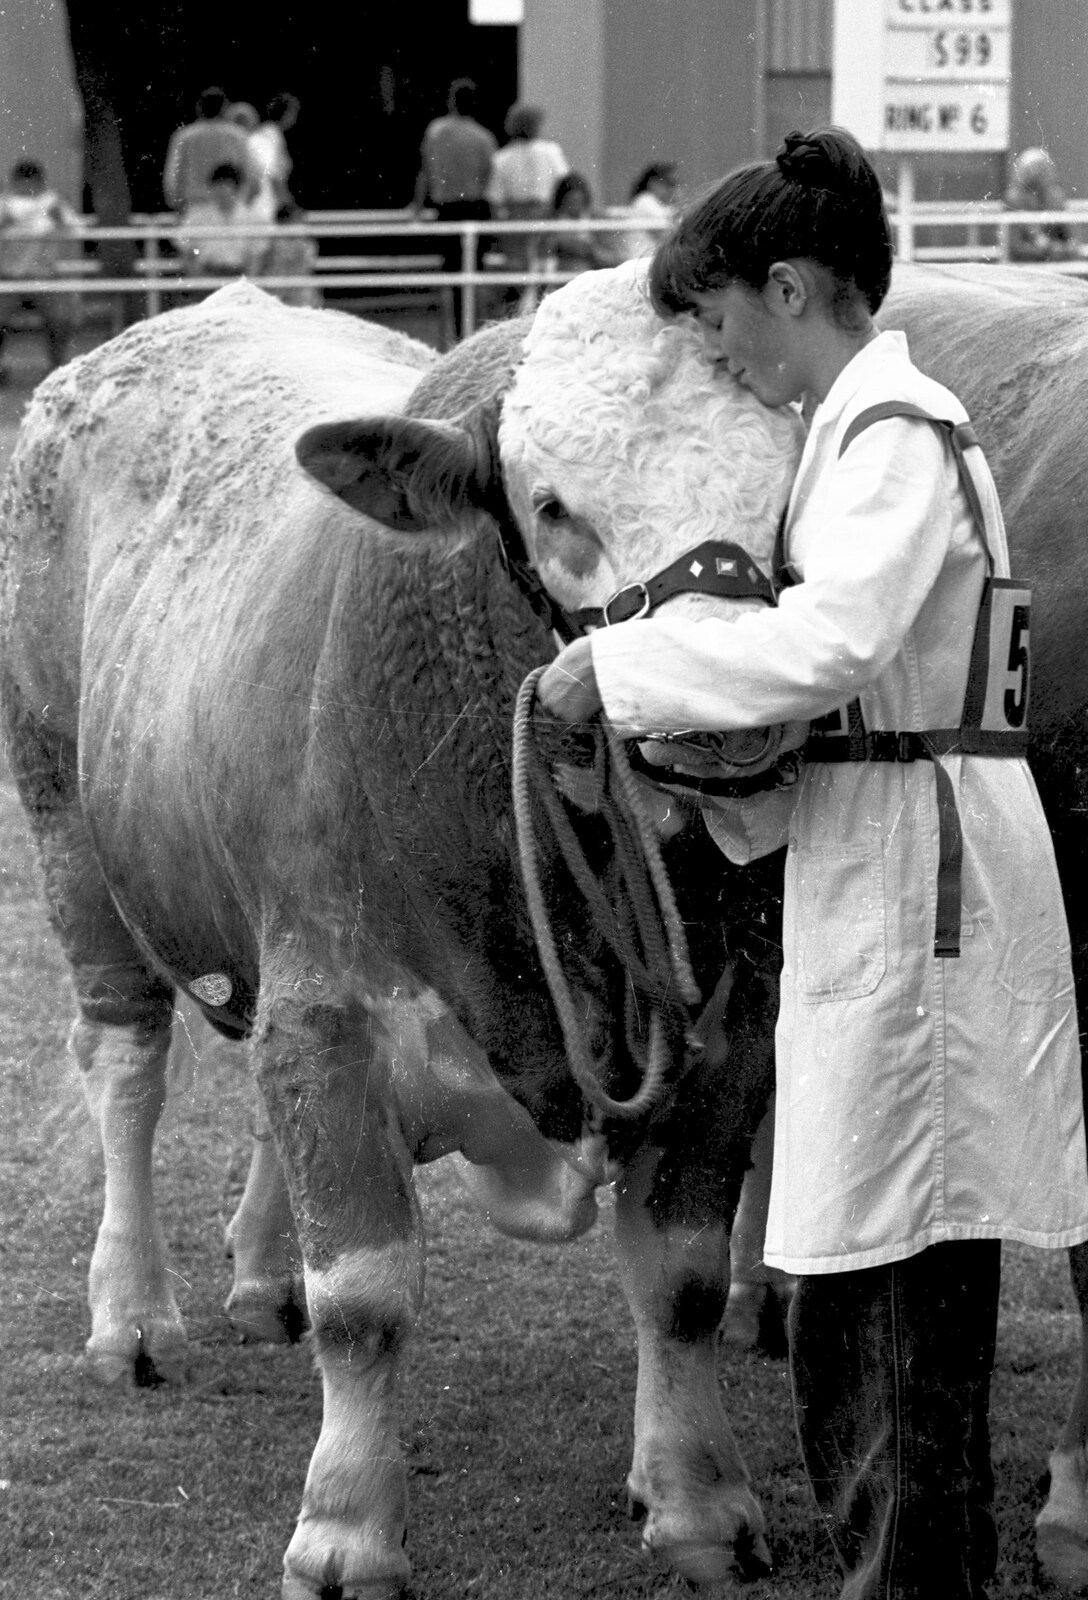 A girl really loves her bull from The Royal Norfolk Show, Costessey Showground, Norwich - June 20th 1994